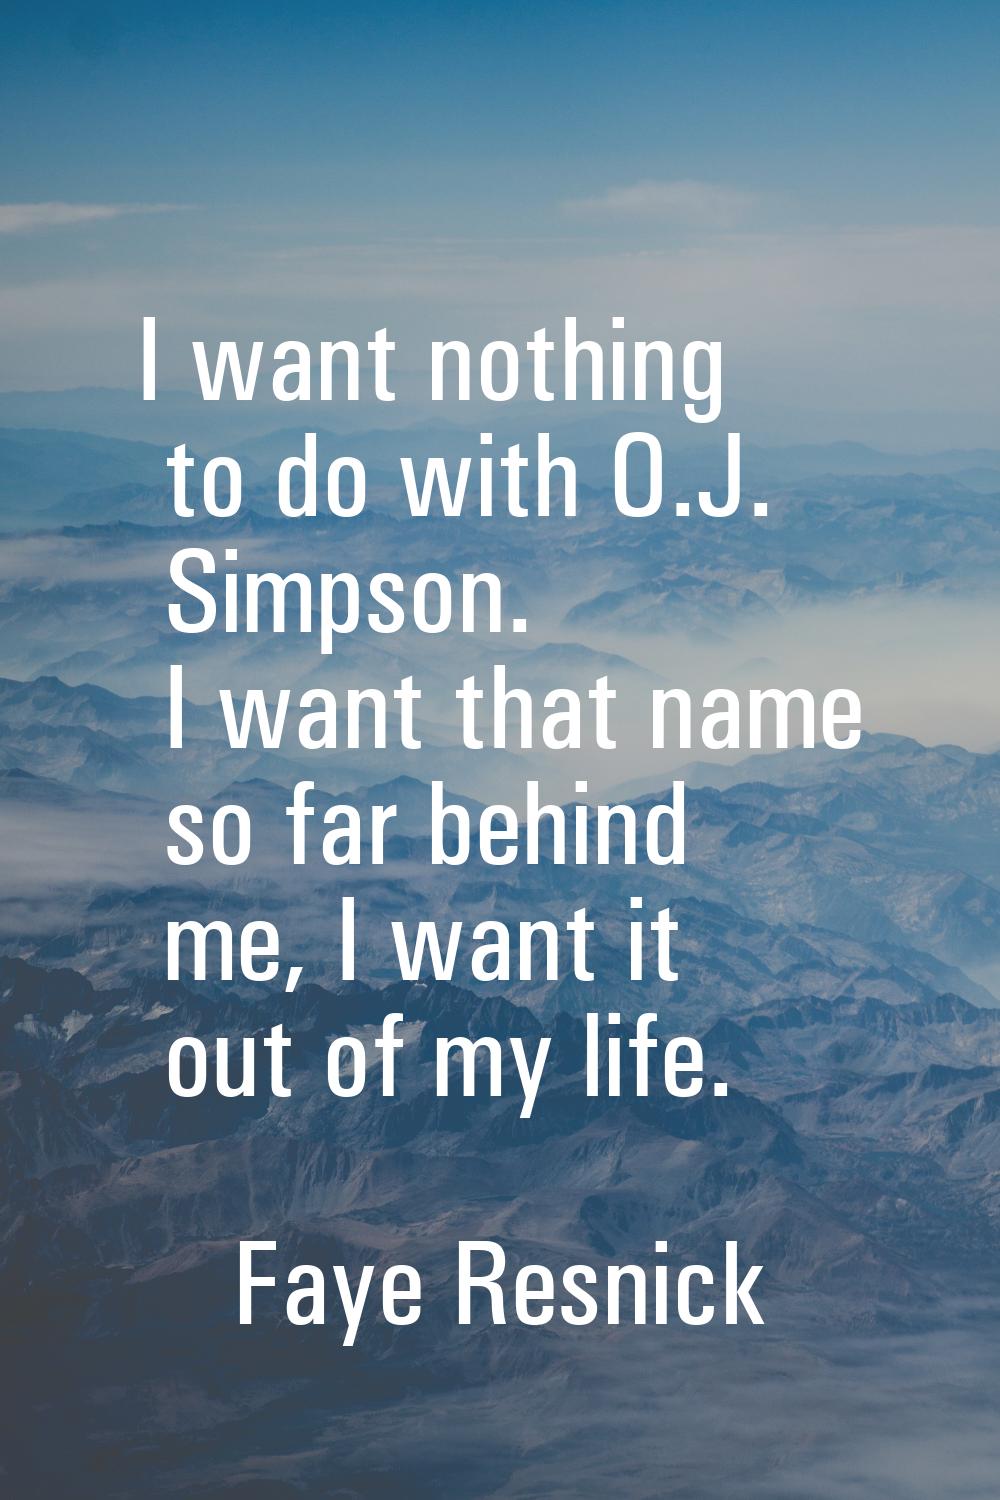 I want nothing to do with O.J. Simpson. I want that name so far behind me, I want it out of my life